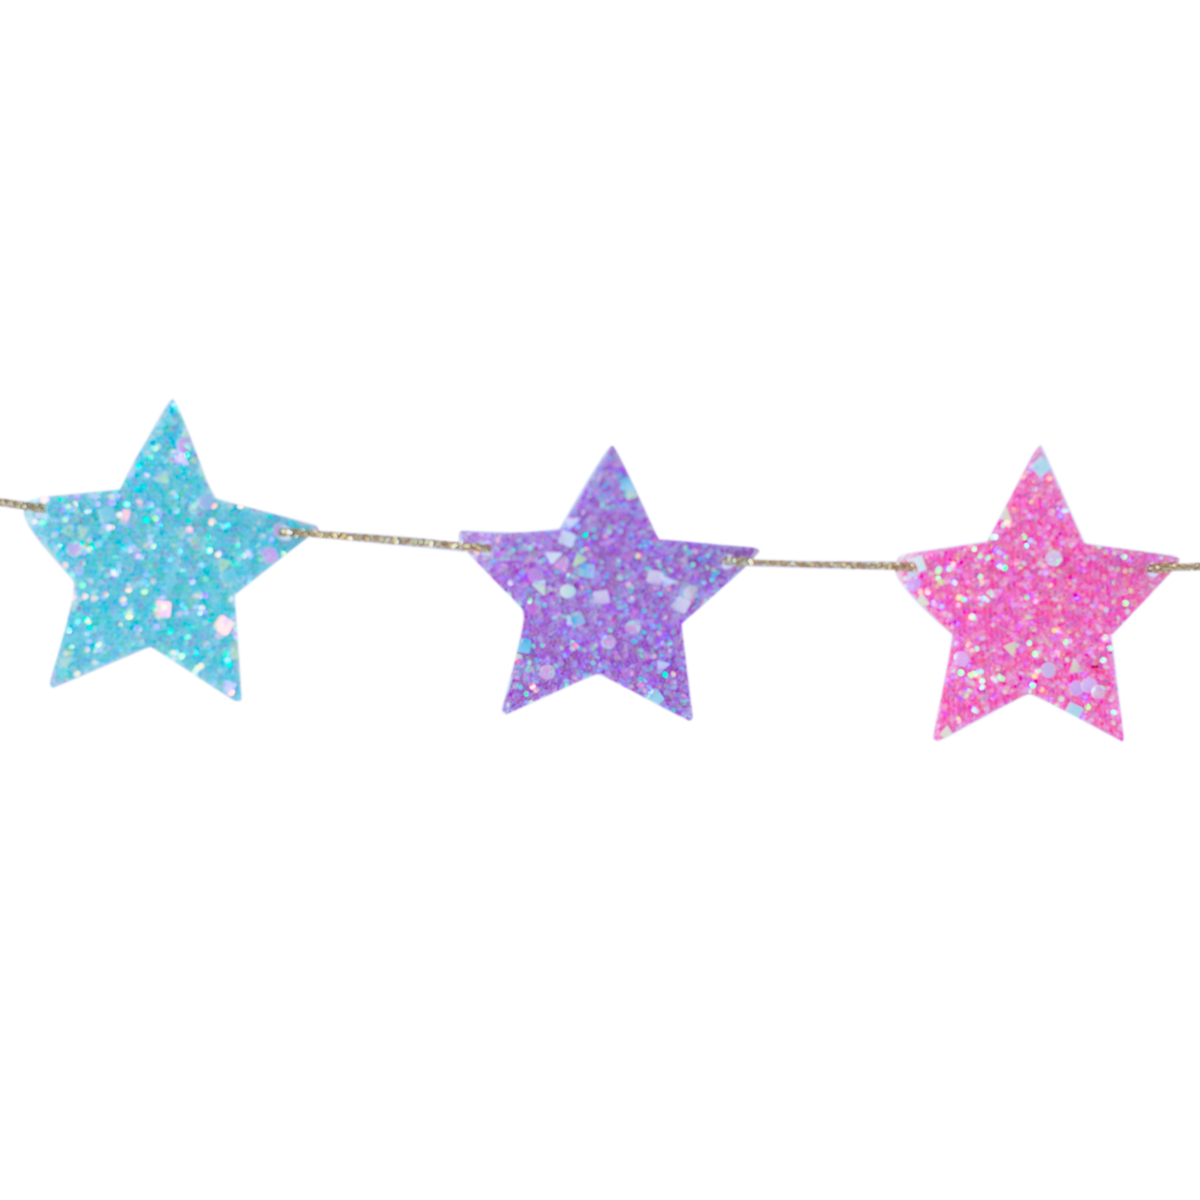 Whimsy Rainbow Colored Glittery Shining Stars Banner